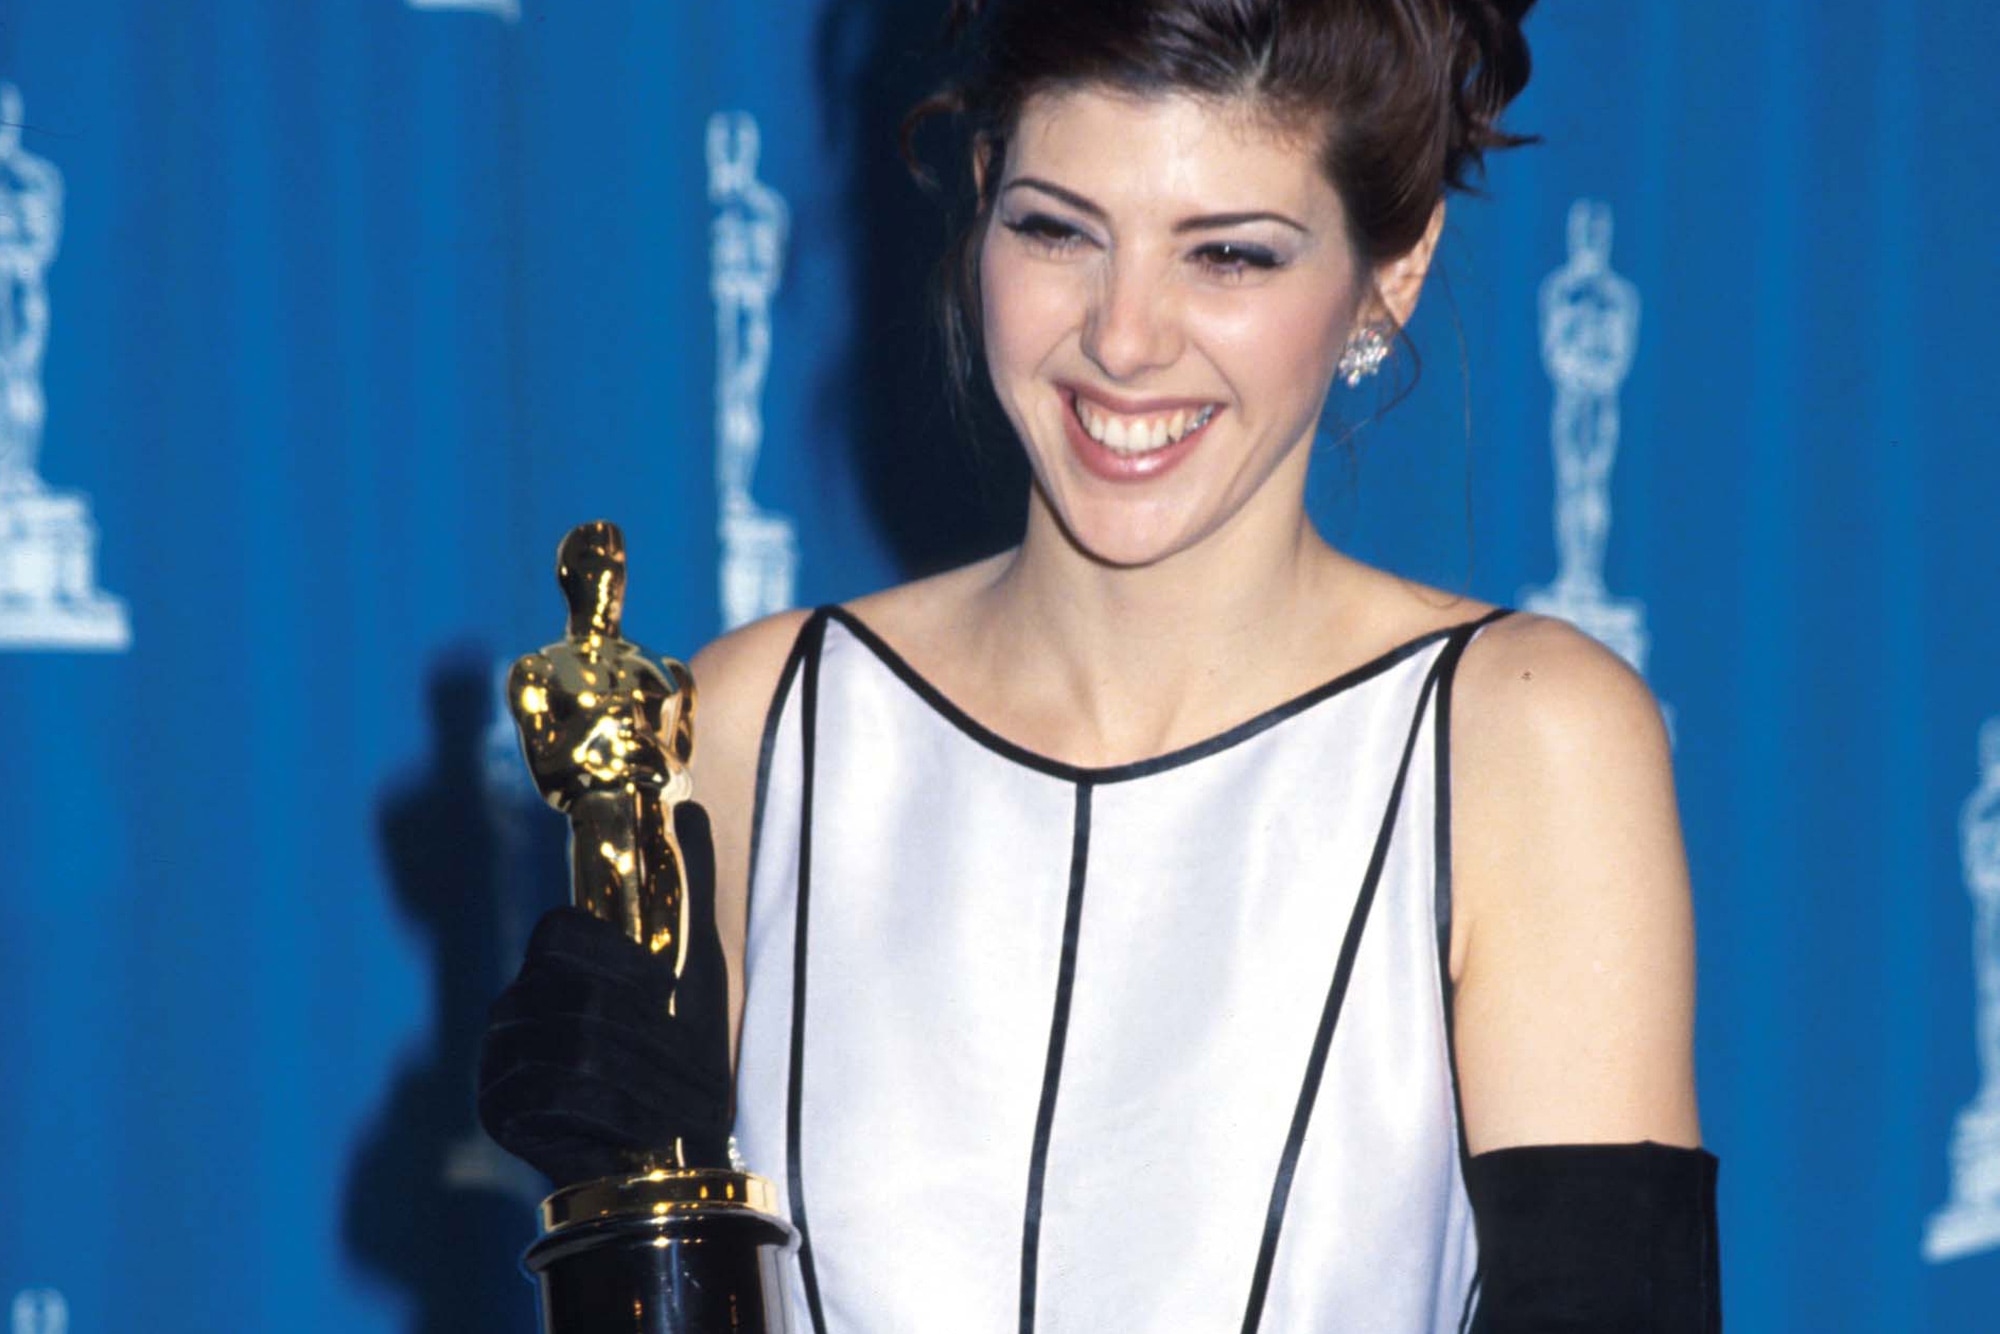 Marisa Tomei stands at the 65th annual Academy Awards March 29, 1993, in Los Angeles, California. Tomei won the Best Supporting Actress award.